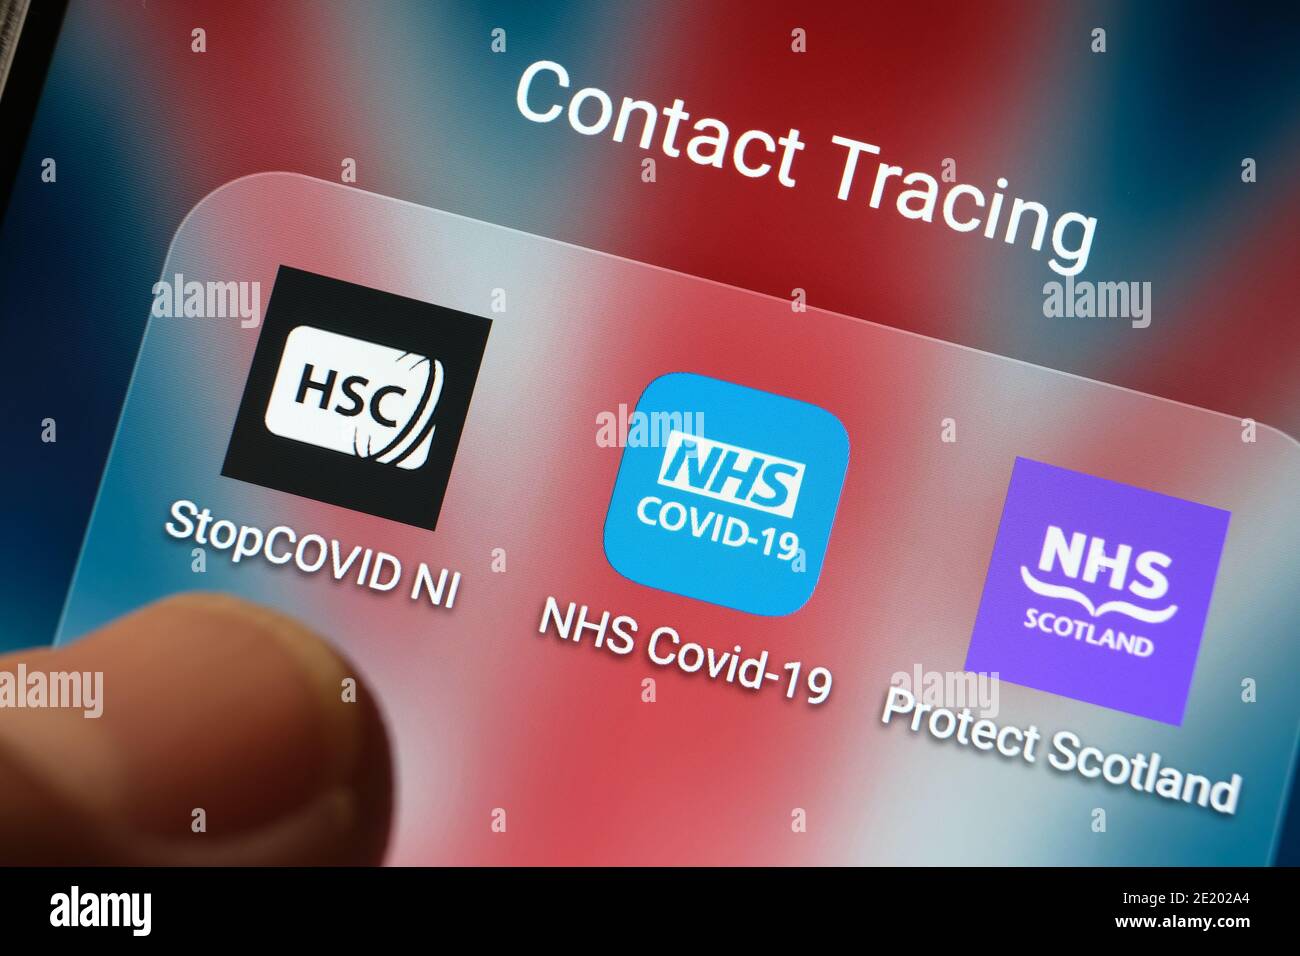 Manchester / United Kingdom - October 22, 2020: United Kingdom's NHS COVID-19 app and other contact tracing apps seen on one screen and blurred finger Stock Photo